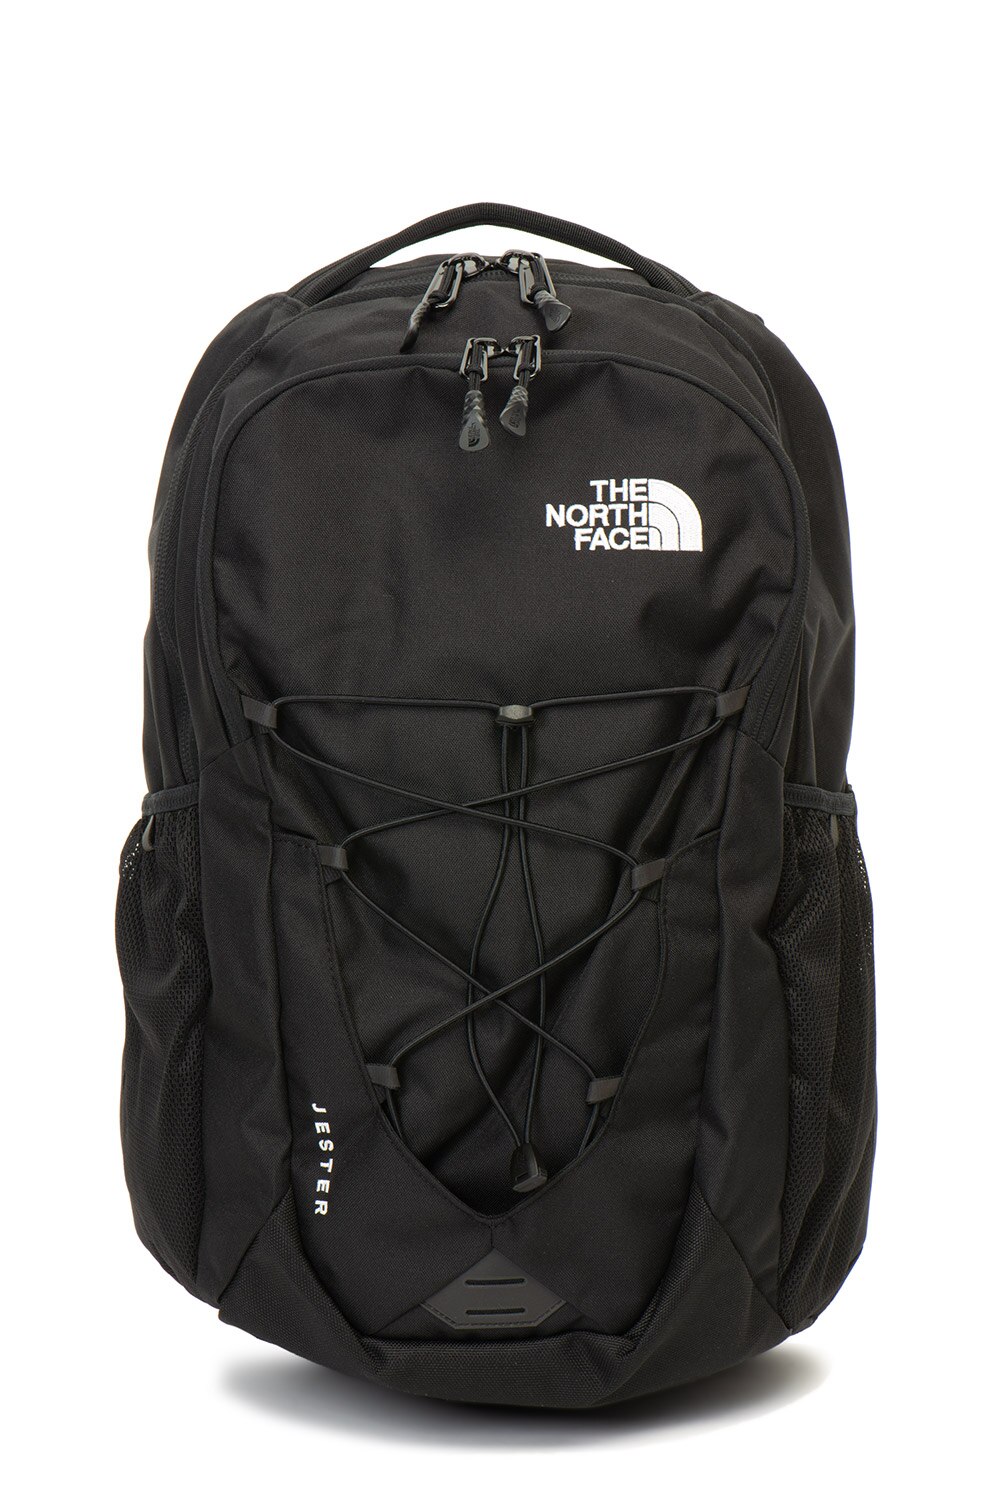 the north face flexvent 